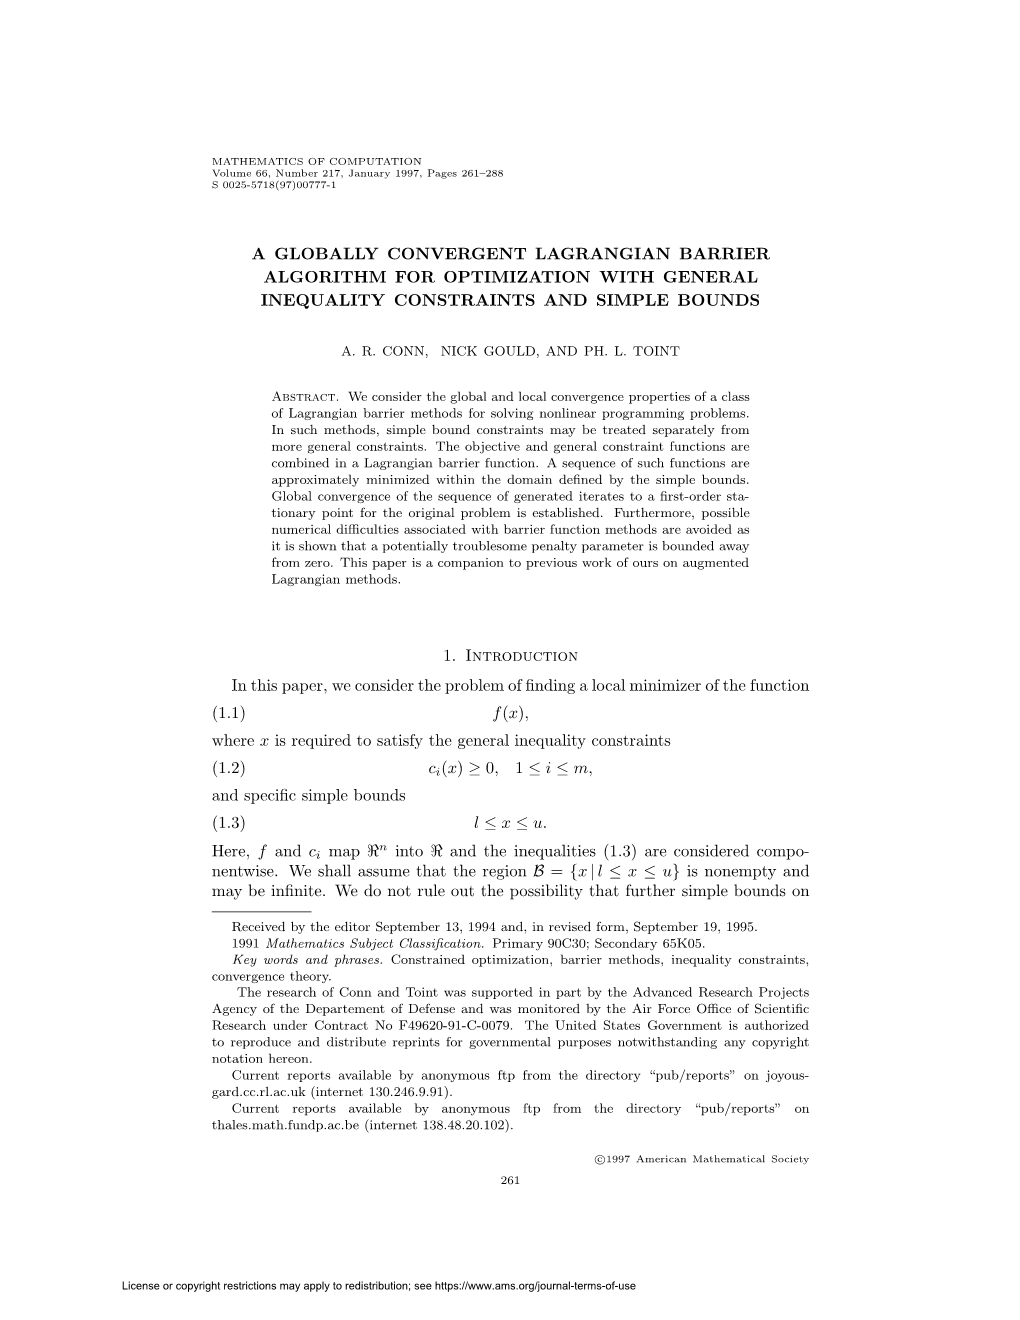 A Globally Convergent Lagrangian Barrier Algorithm for Optimization with General Inequality Constraints and Simple Bounds